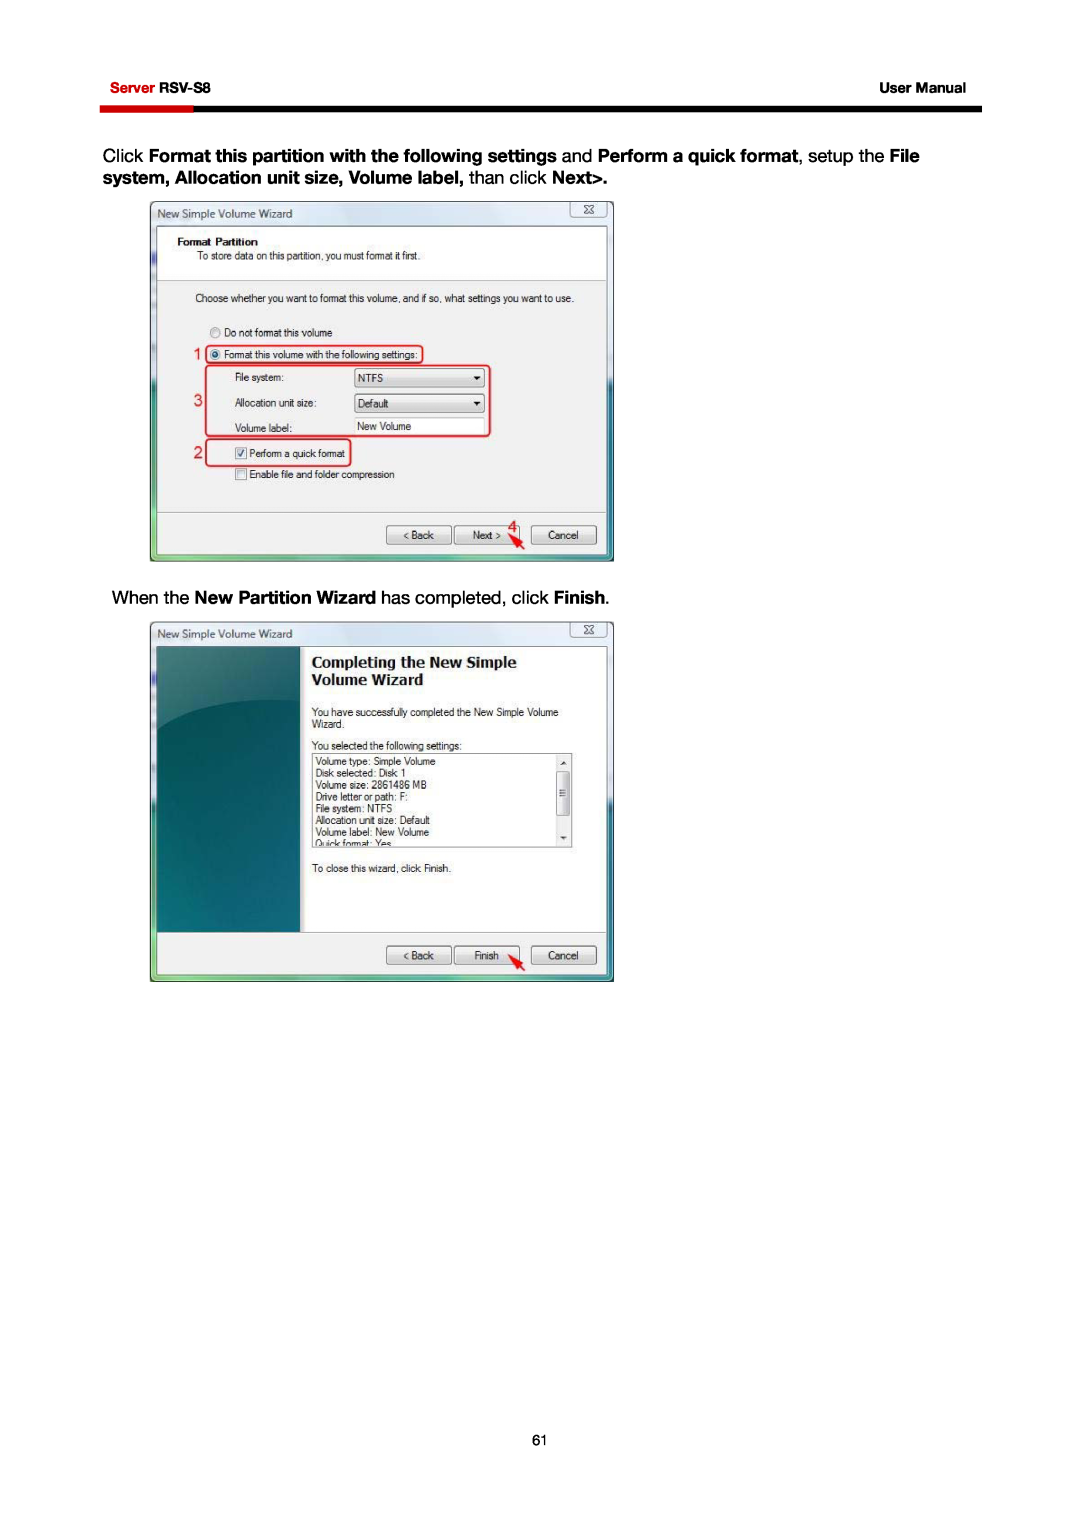 Rosewill user manual When the New Partition Wizard has completed, click Finish, Server RSV-S8, User Manual 